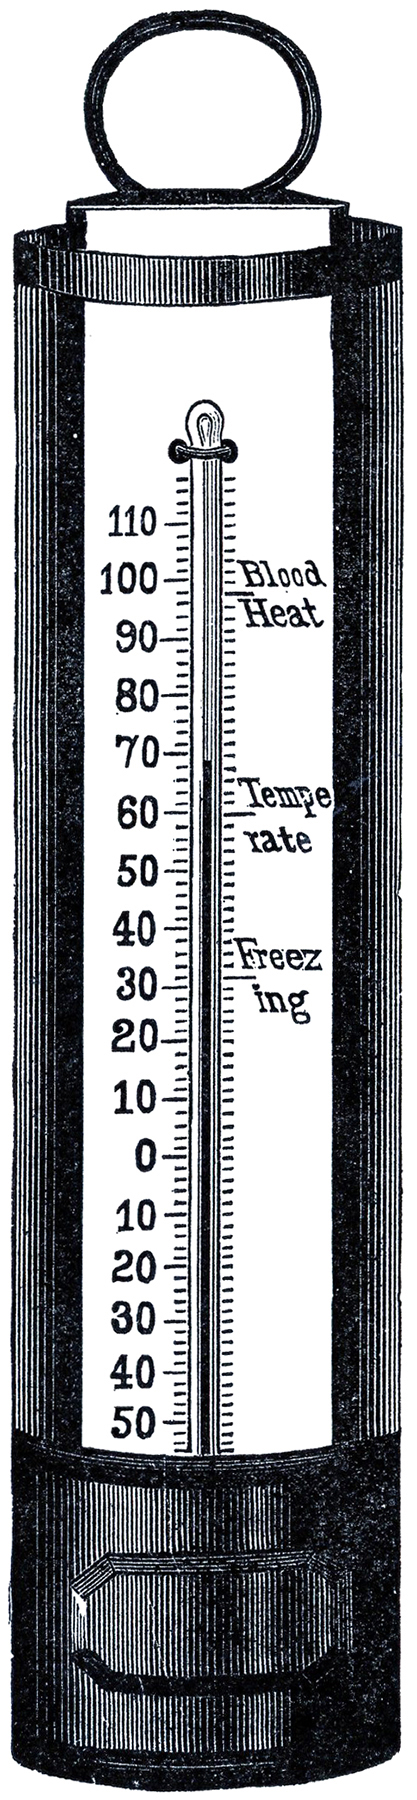 Free Thermometer Clip Art - The Graphics Fairy